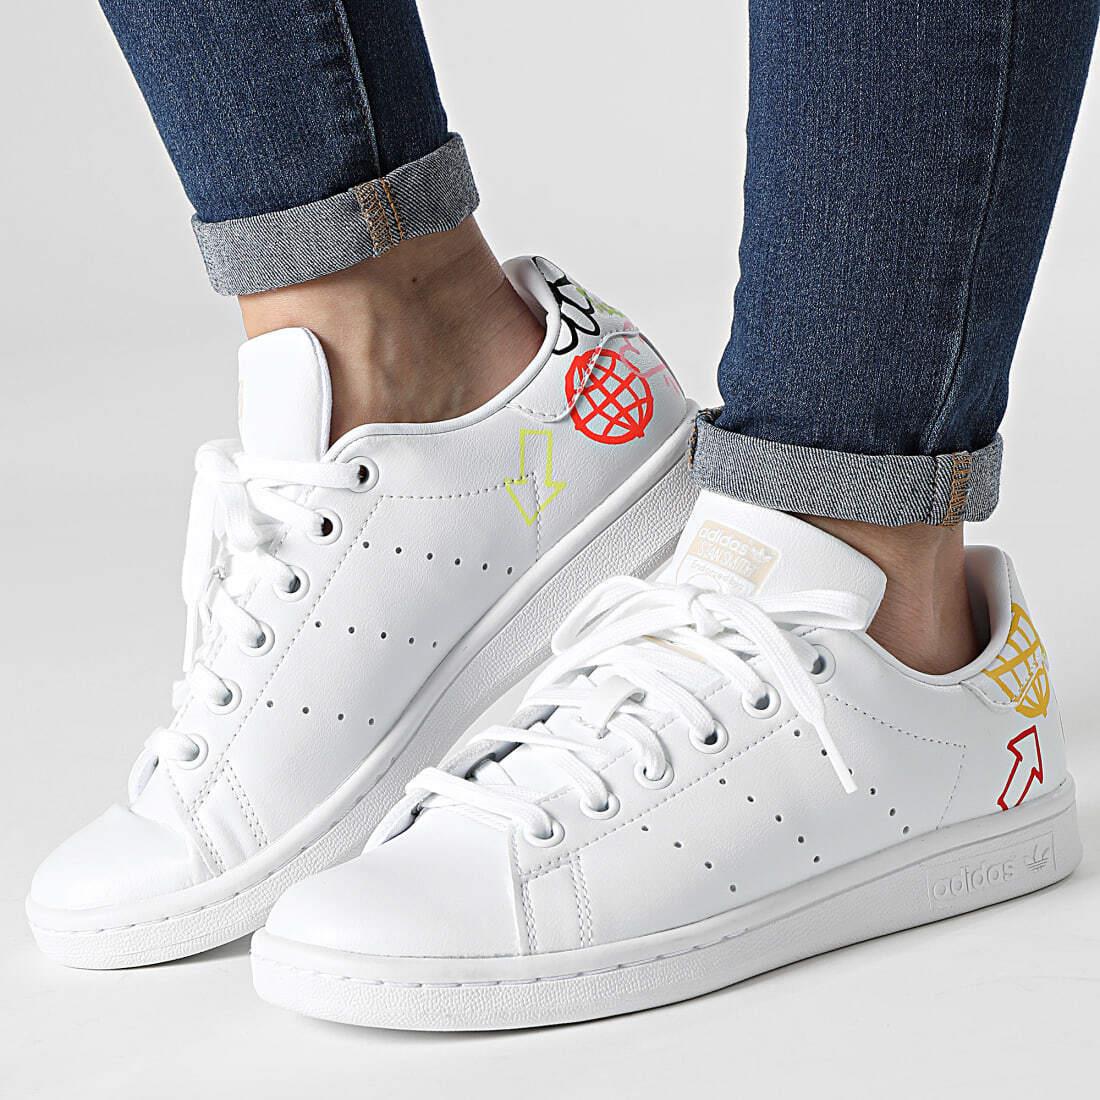 Adidas shoes STAN SMITH - WHITE/MULTICOLOR 0